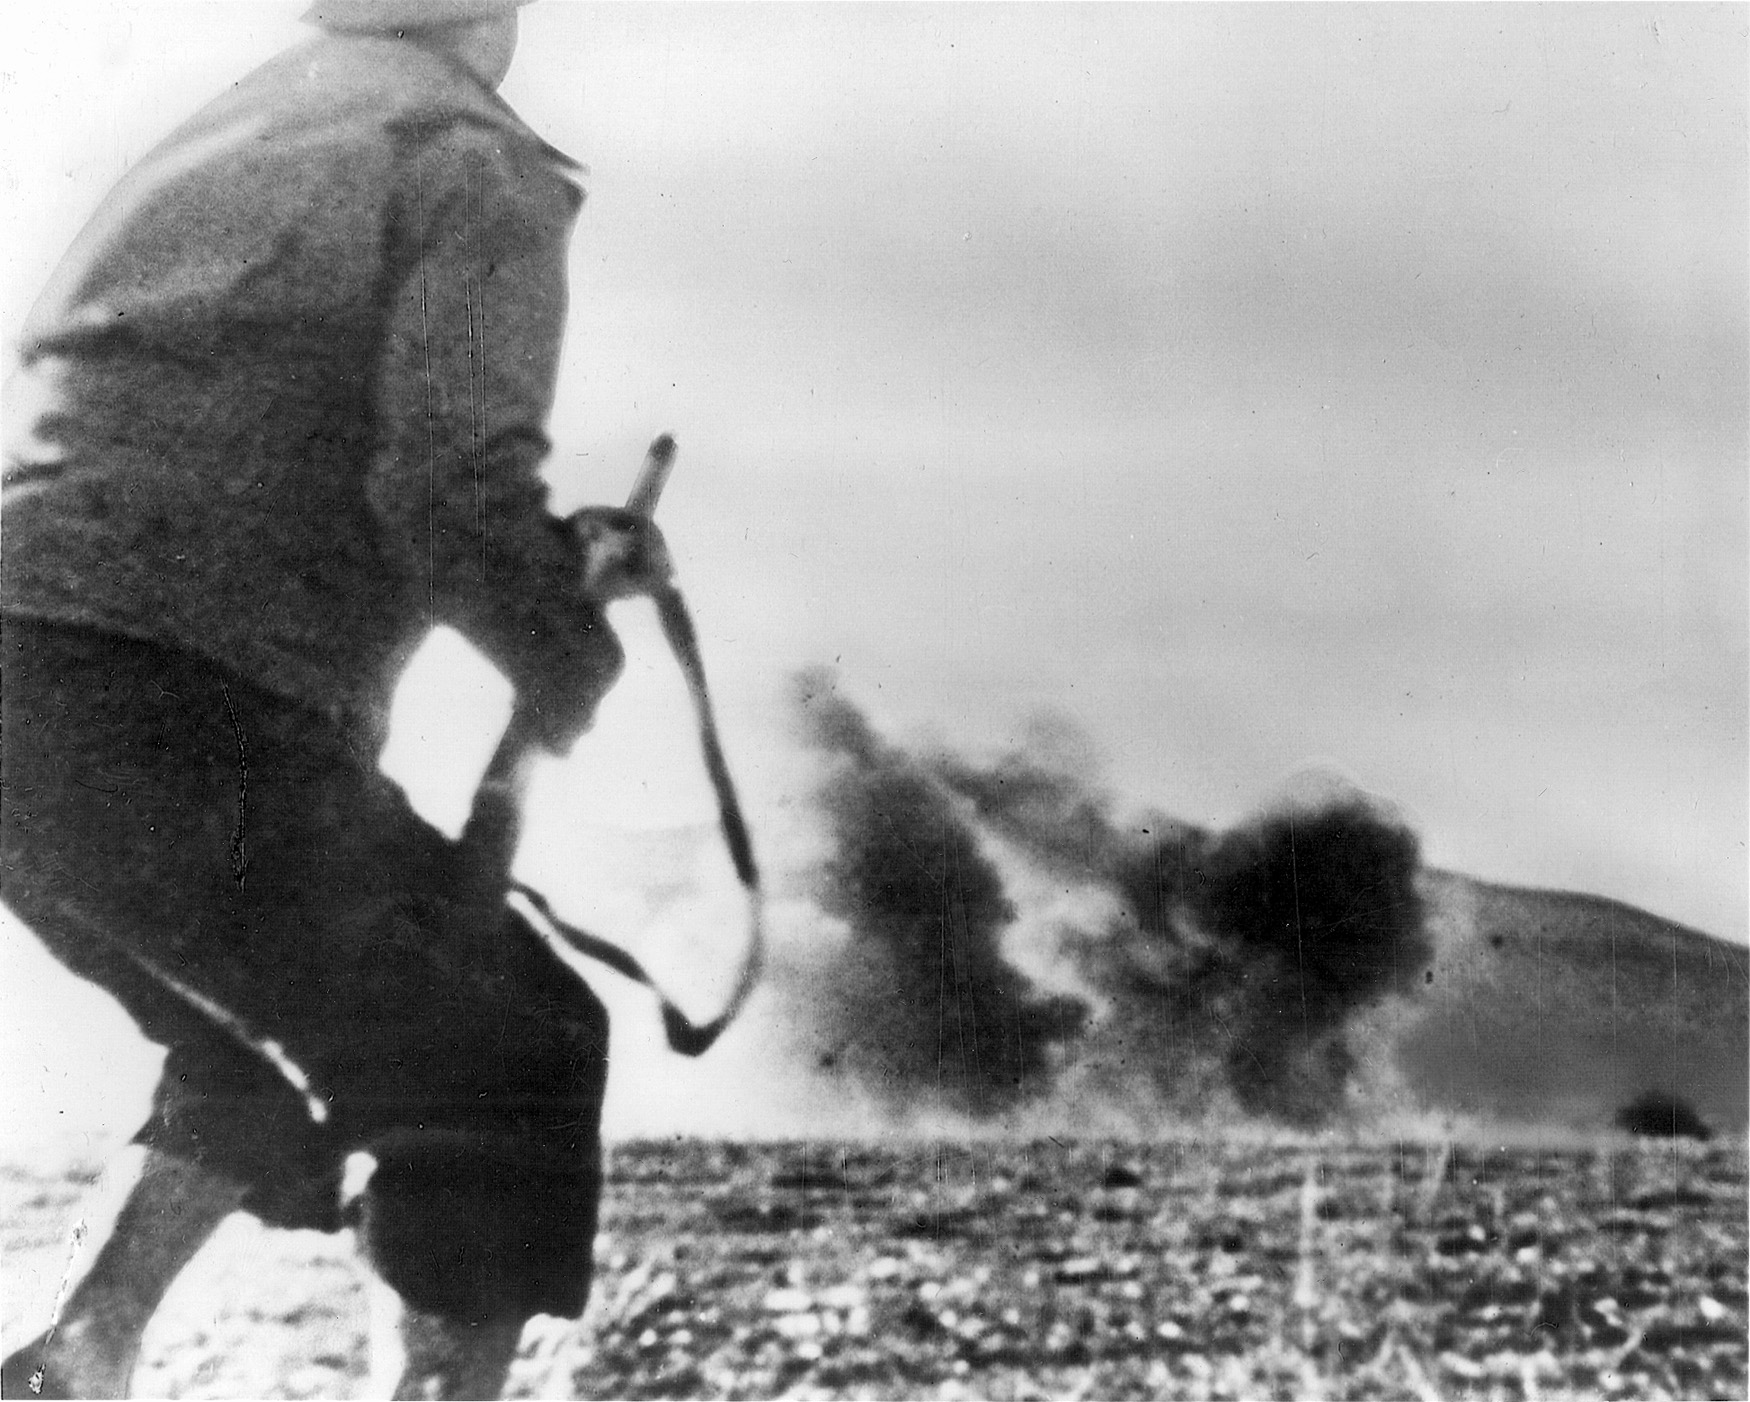 A German artillery shell shocks an American soldier on the battlefield in North Africa. Early encounters with the Germans resulted in stinging defeats for the U.S. Army. 